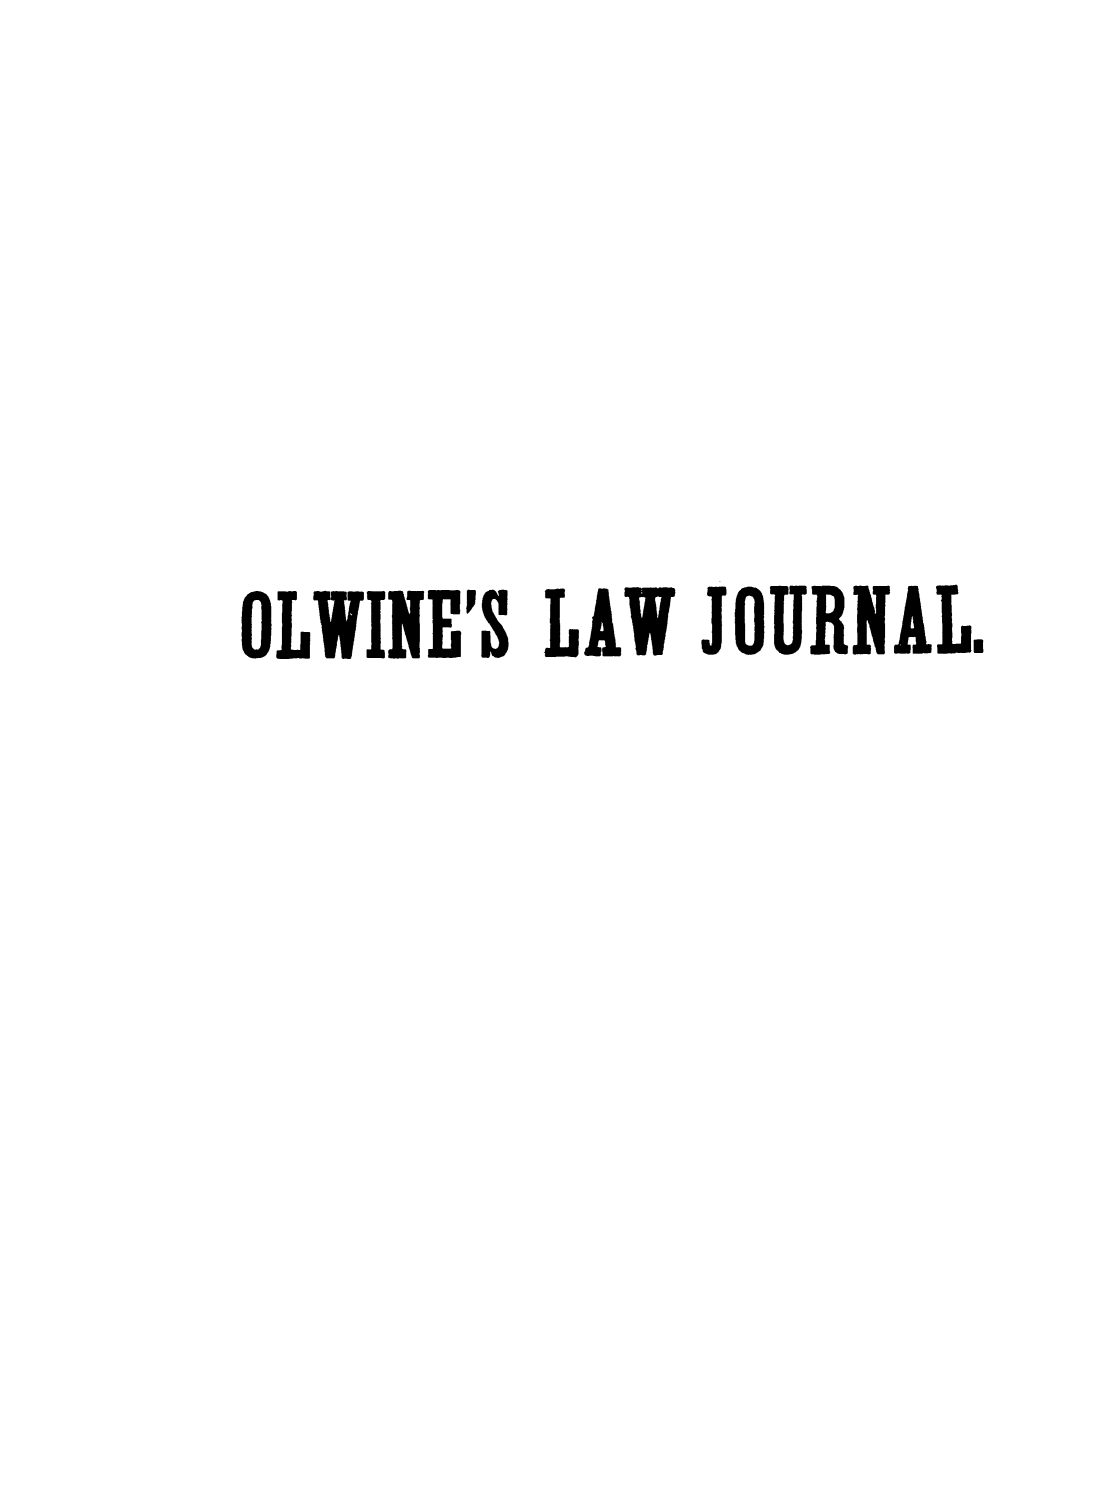 handle is hein.journals/olwinljo1 and id is 1 raw text is: OLWINE'S LAW JOURNAL.


